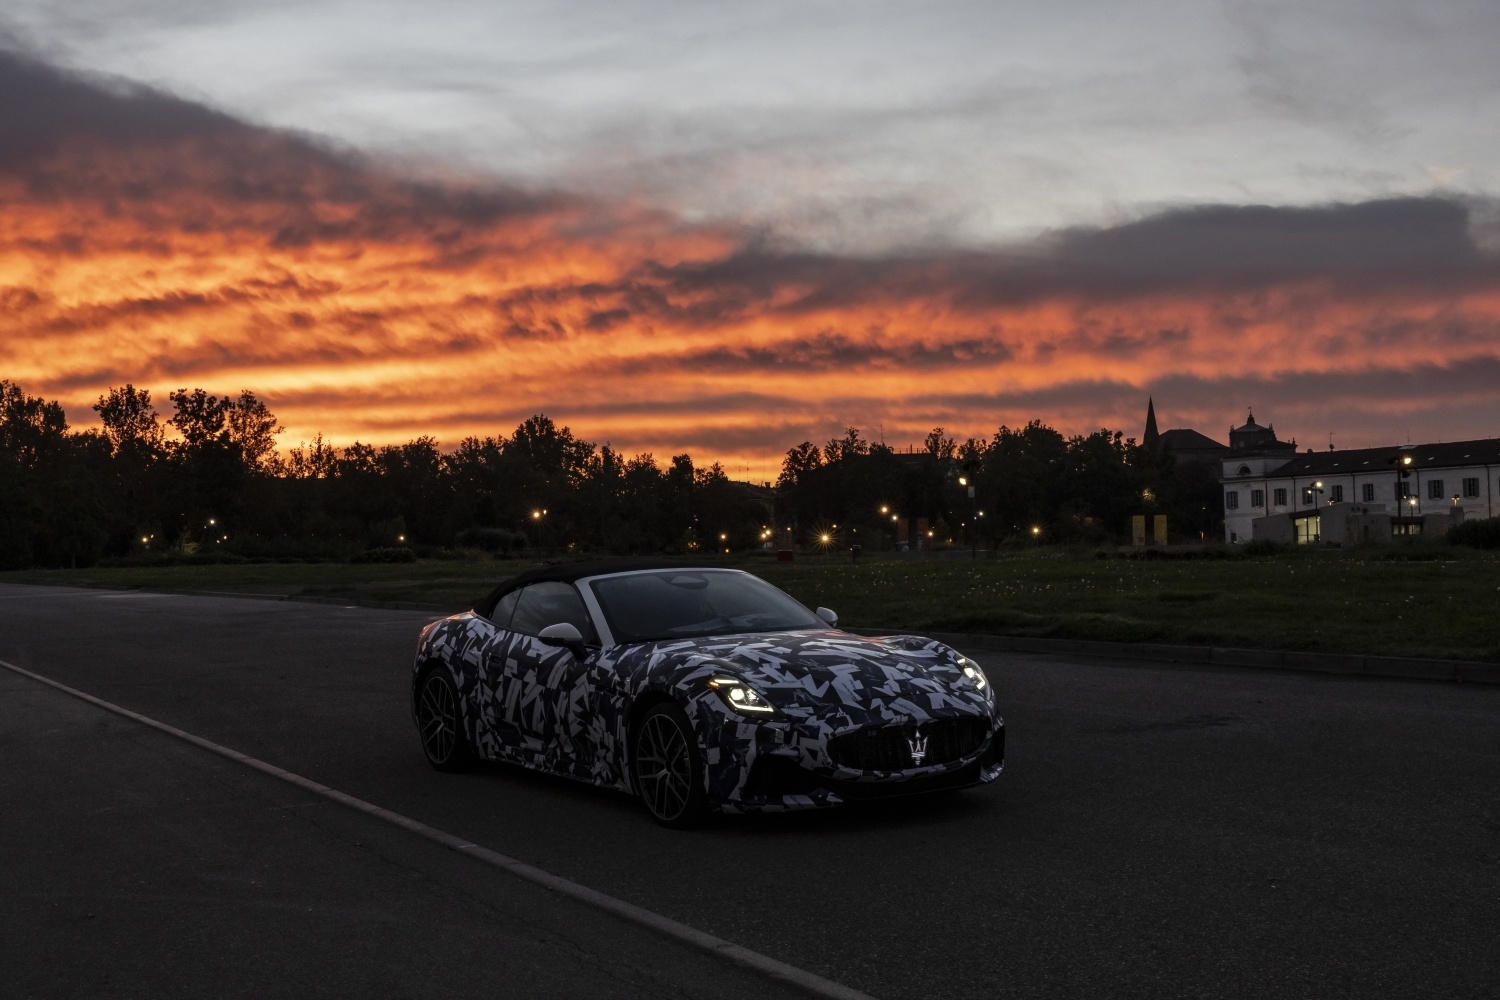 The first images of the new Maserati GranCabrio prototype